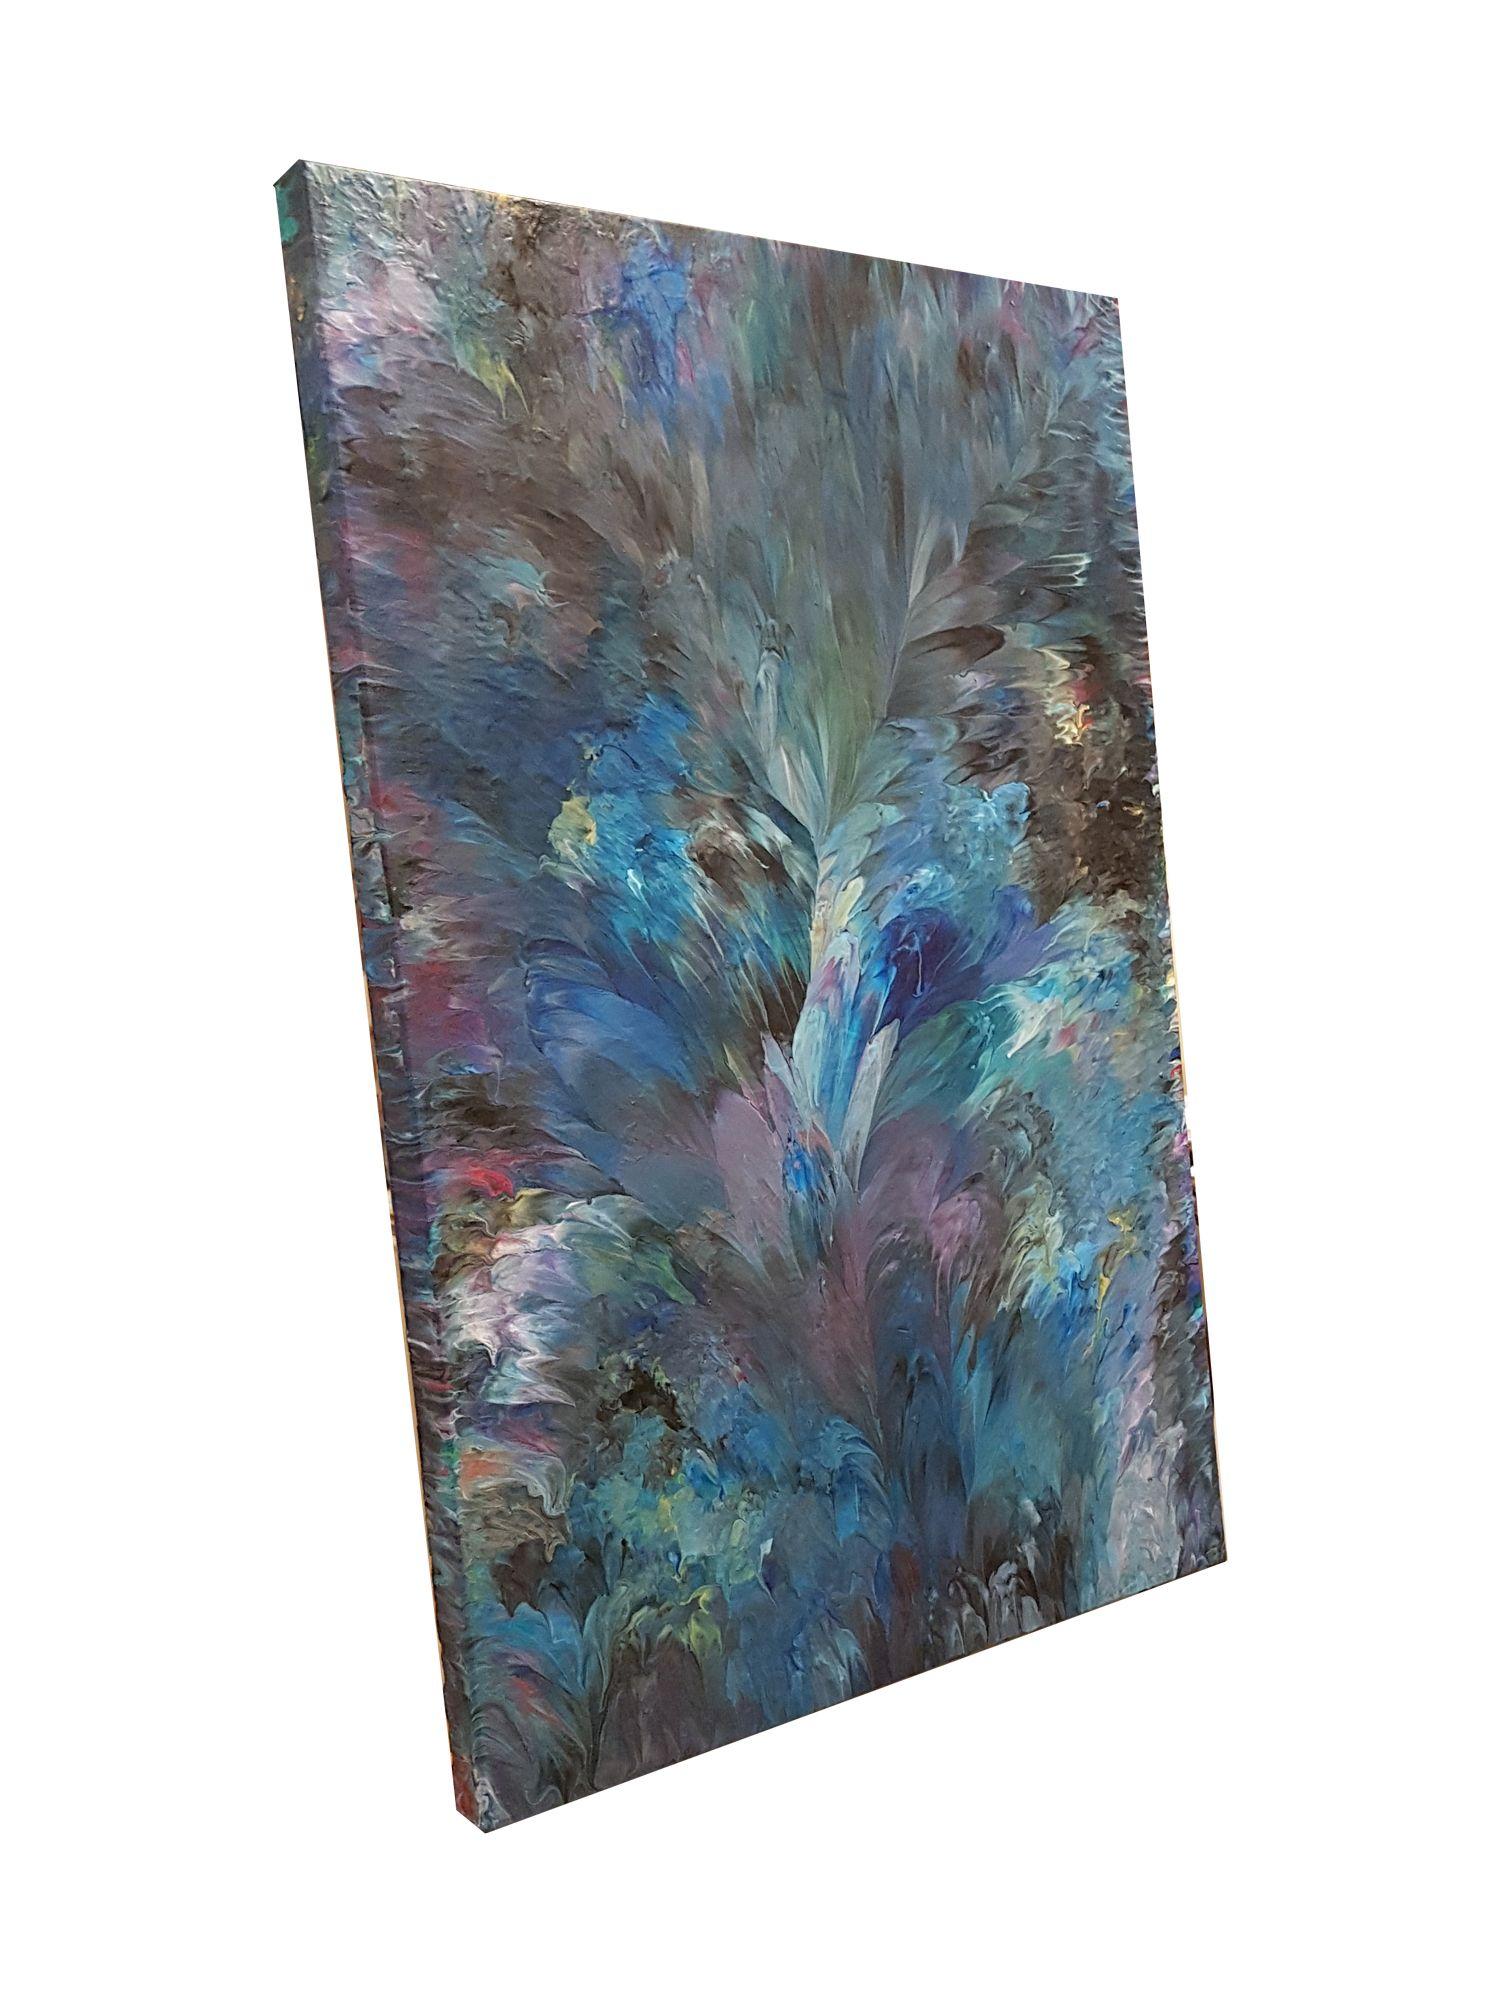 The unique abstract painting 'Blue Abyss' features a deep and dark colour palette. Black and blue colours, violet hues, white and yellow accents fiercely interact with each other and explode from a central focal point, creating a fast-moving stream